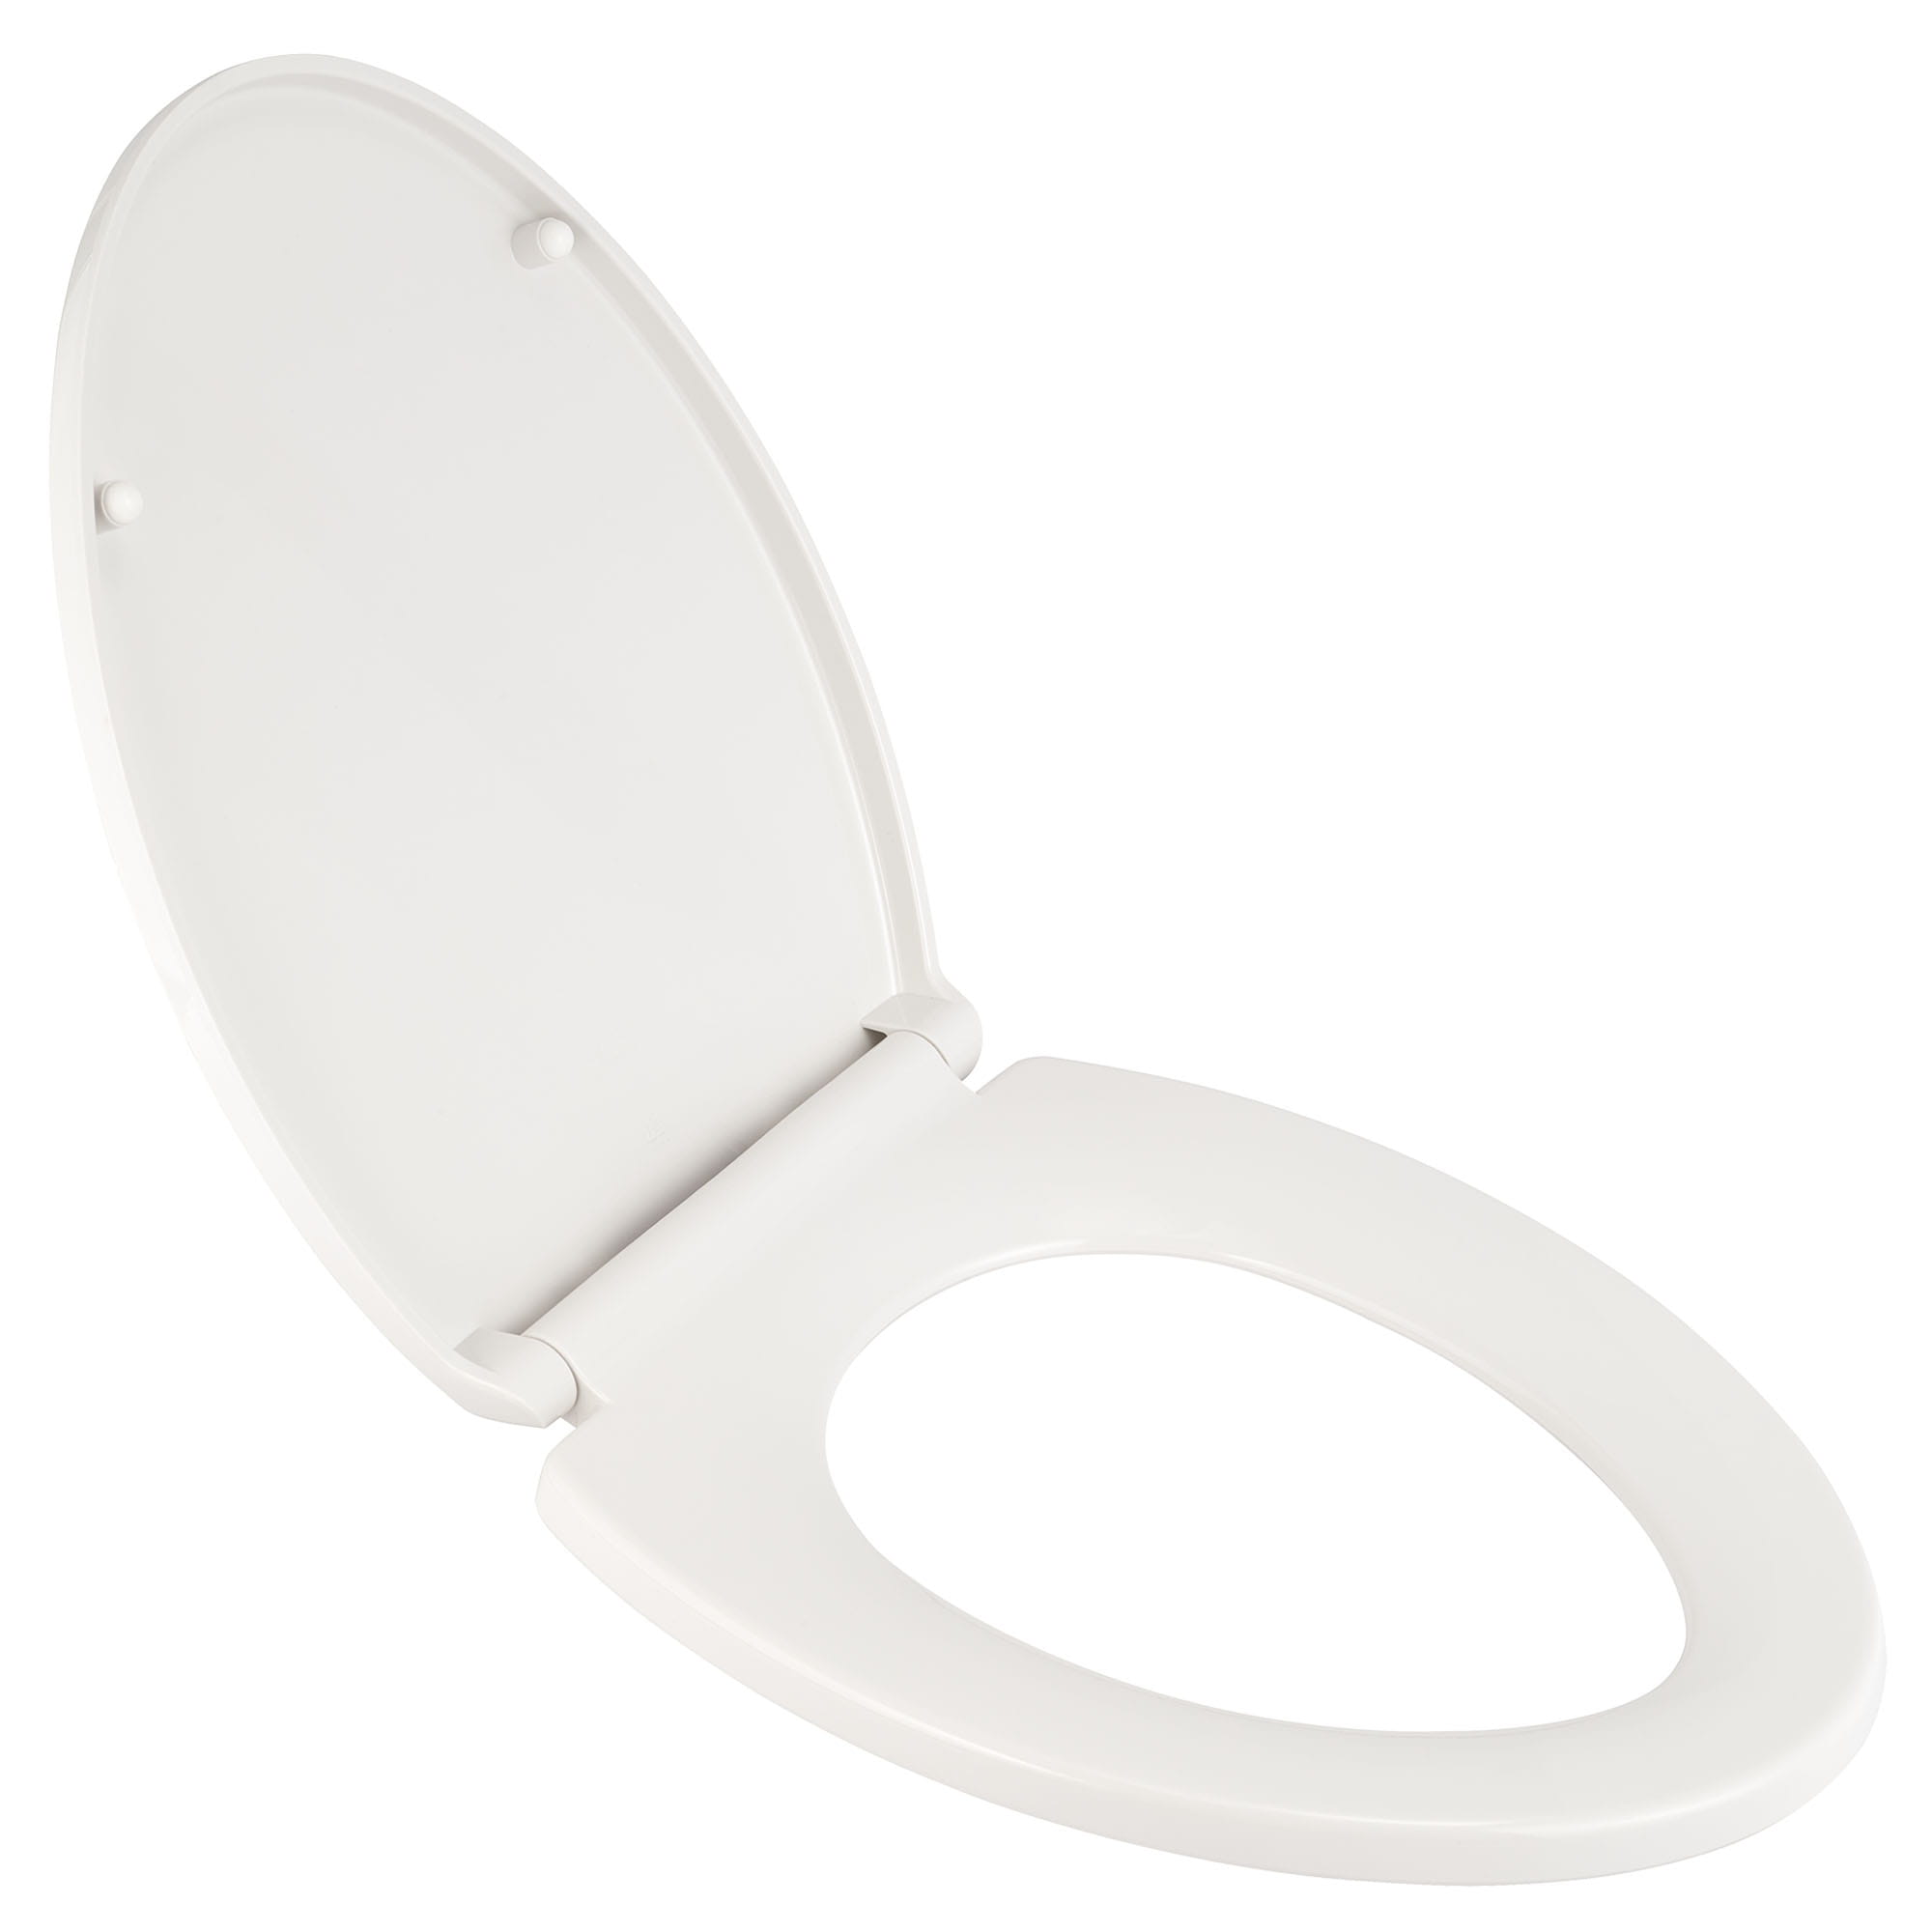 Transitional Slow-Close & Easy Lift-Off Elongated Toilet Seat